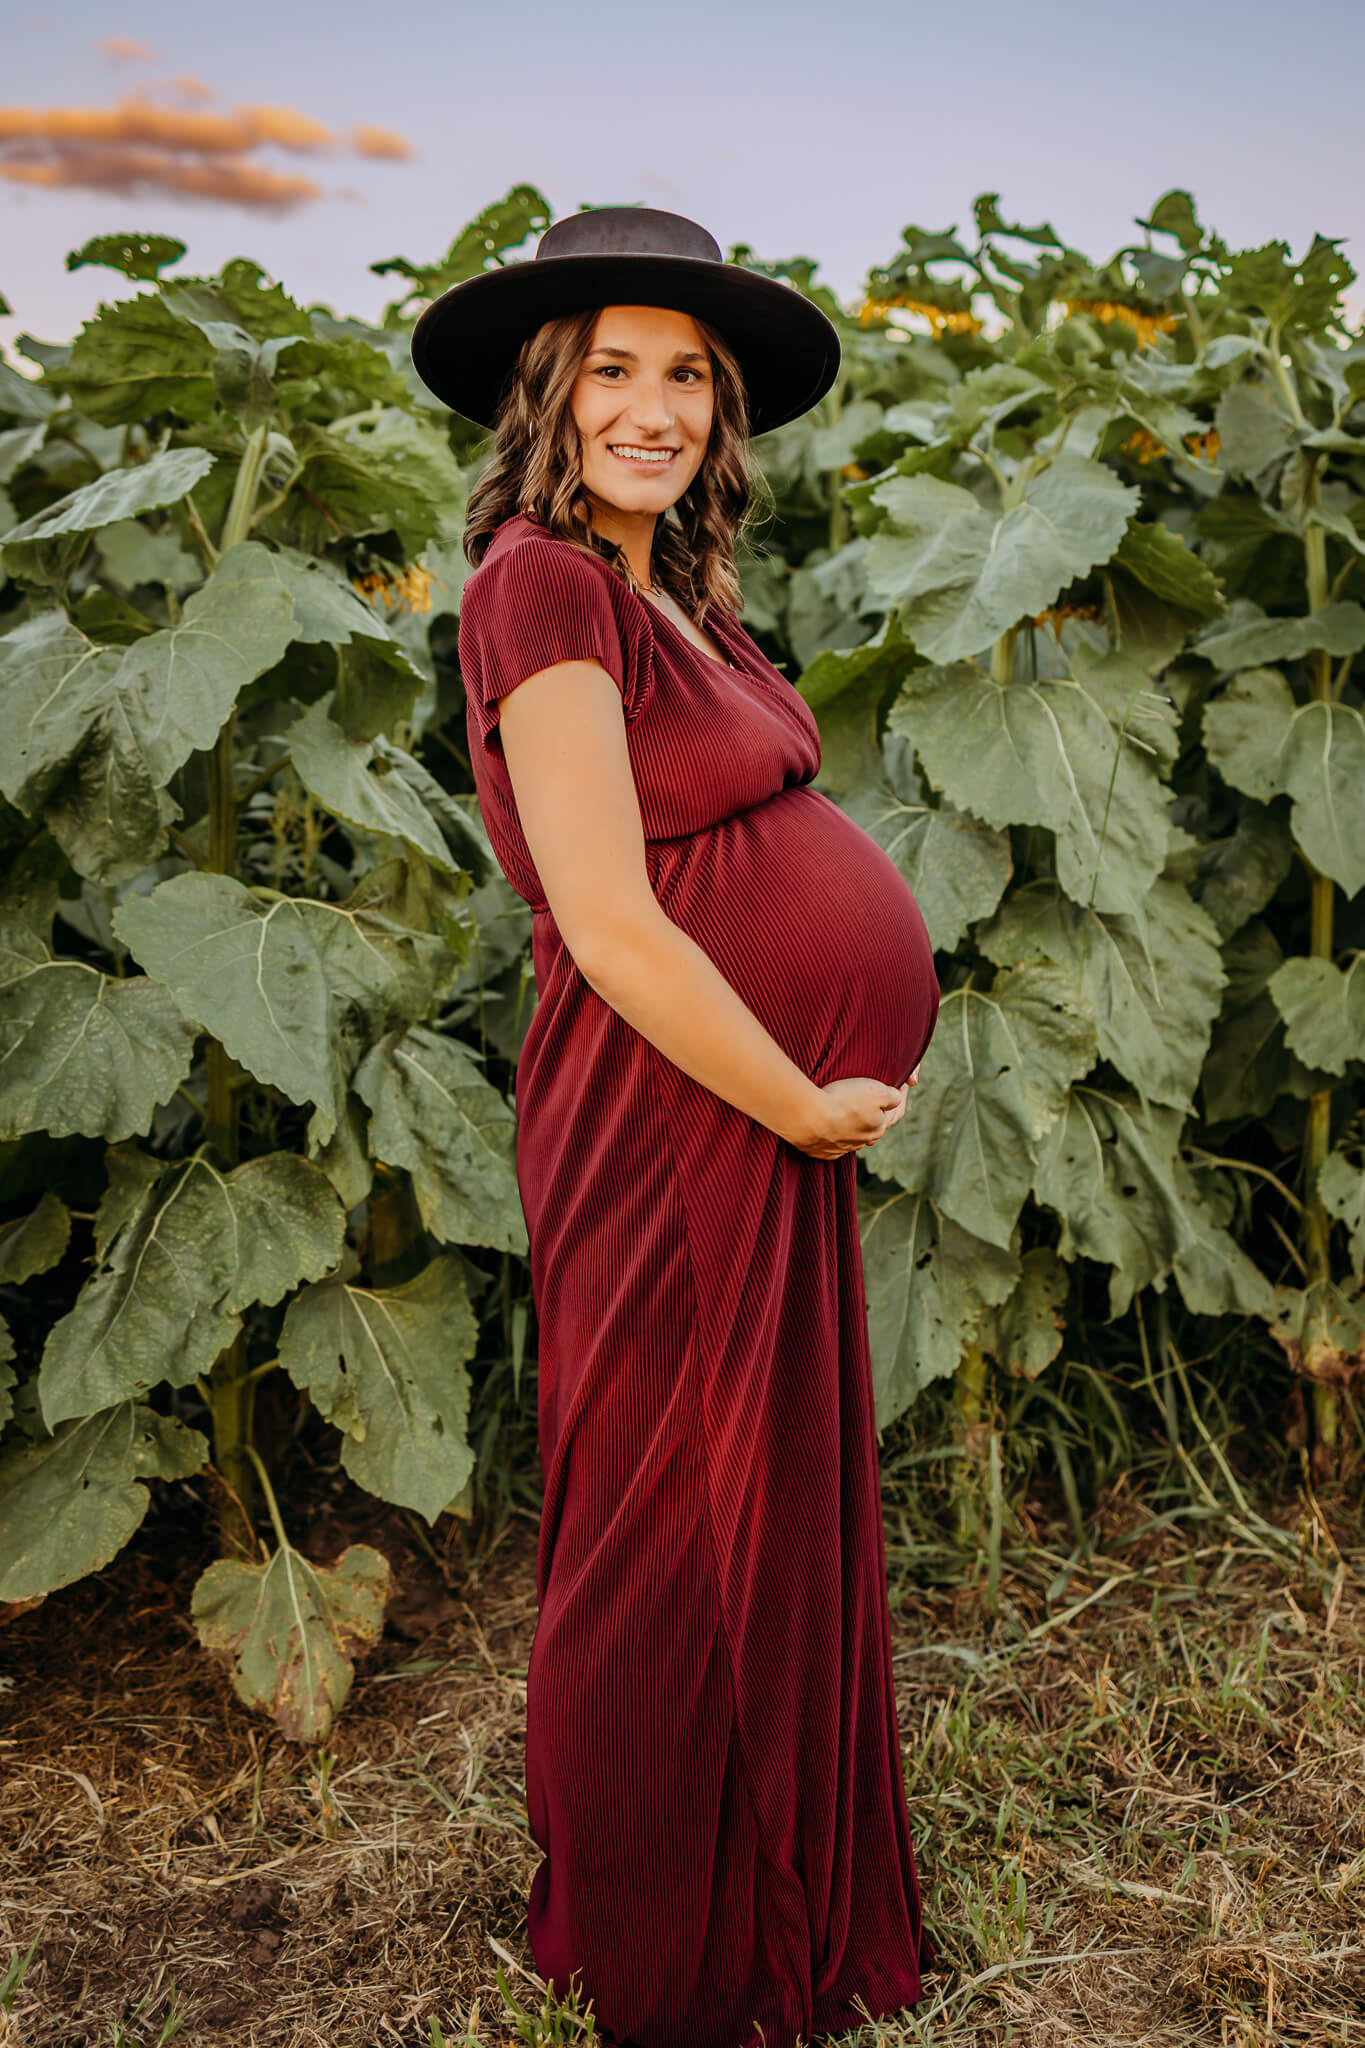 A mom to be wears a red maternity gown in a field of tall sunflowers at sunset